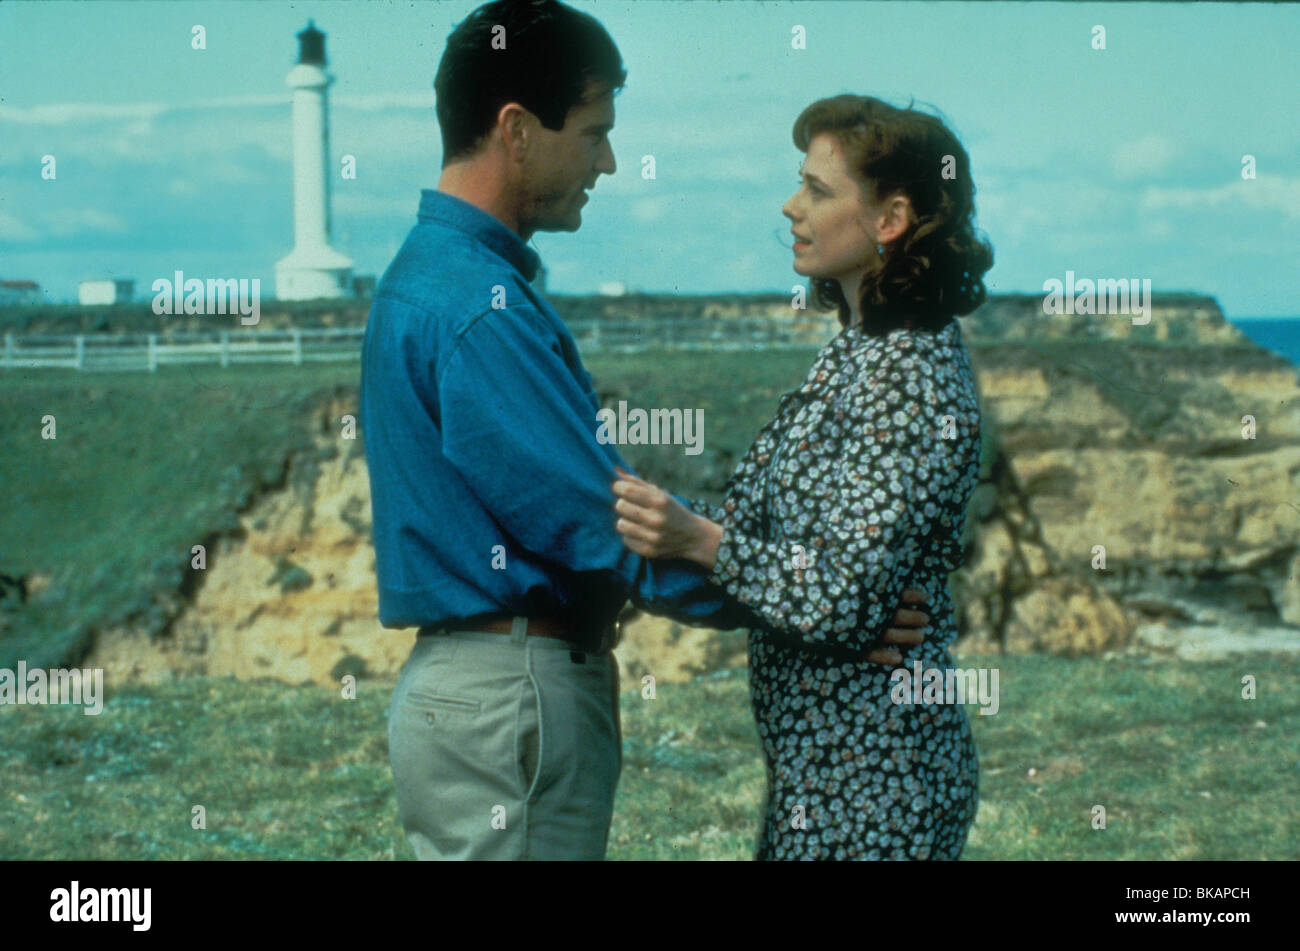 FOREVER YOUNG (1992) MEL GIBSON, ISABEL GLASSER FVYN 062 MOVIESTORE COLLECTION LTD Stock Photo